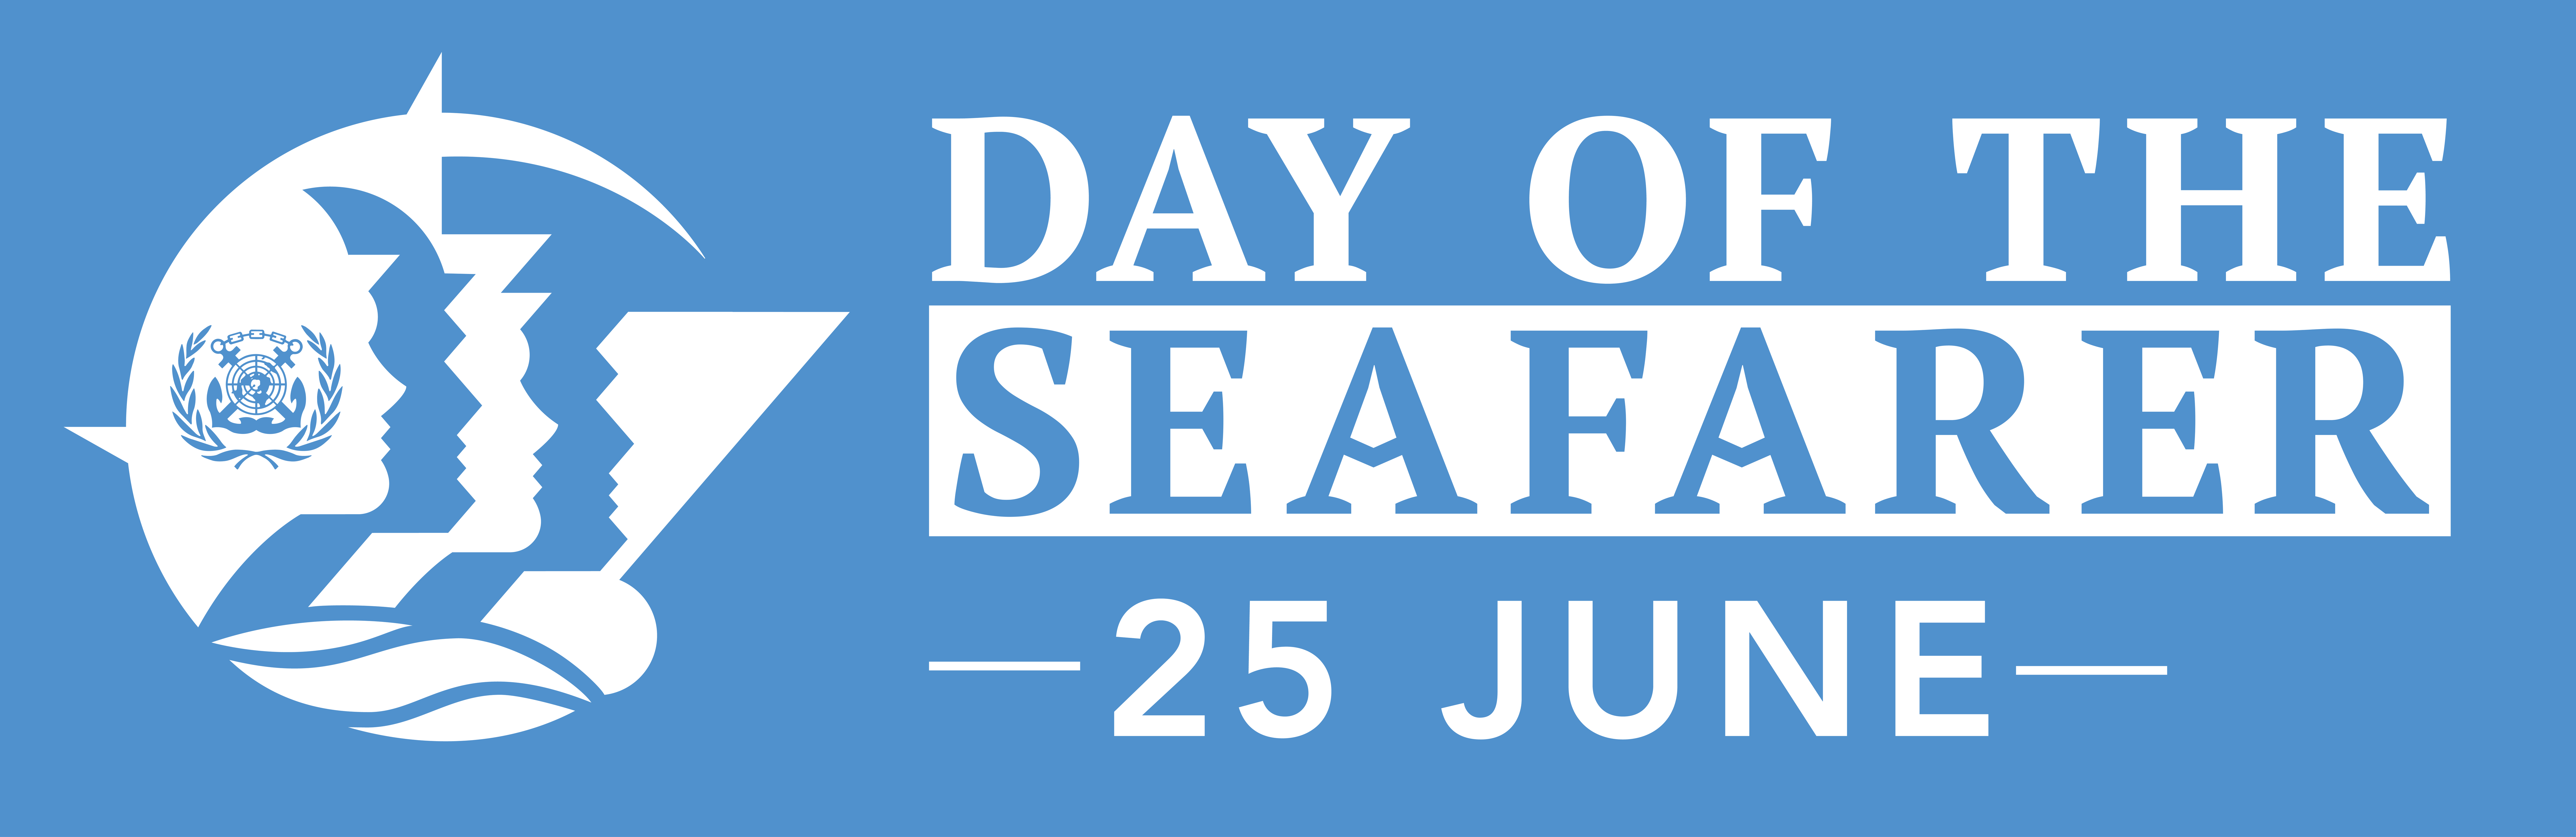 Image: Day of the Seafarer